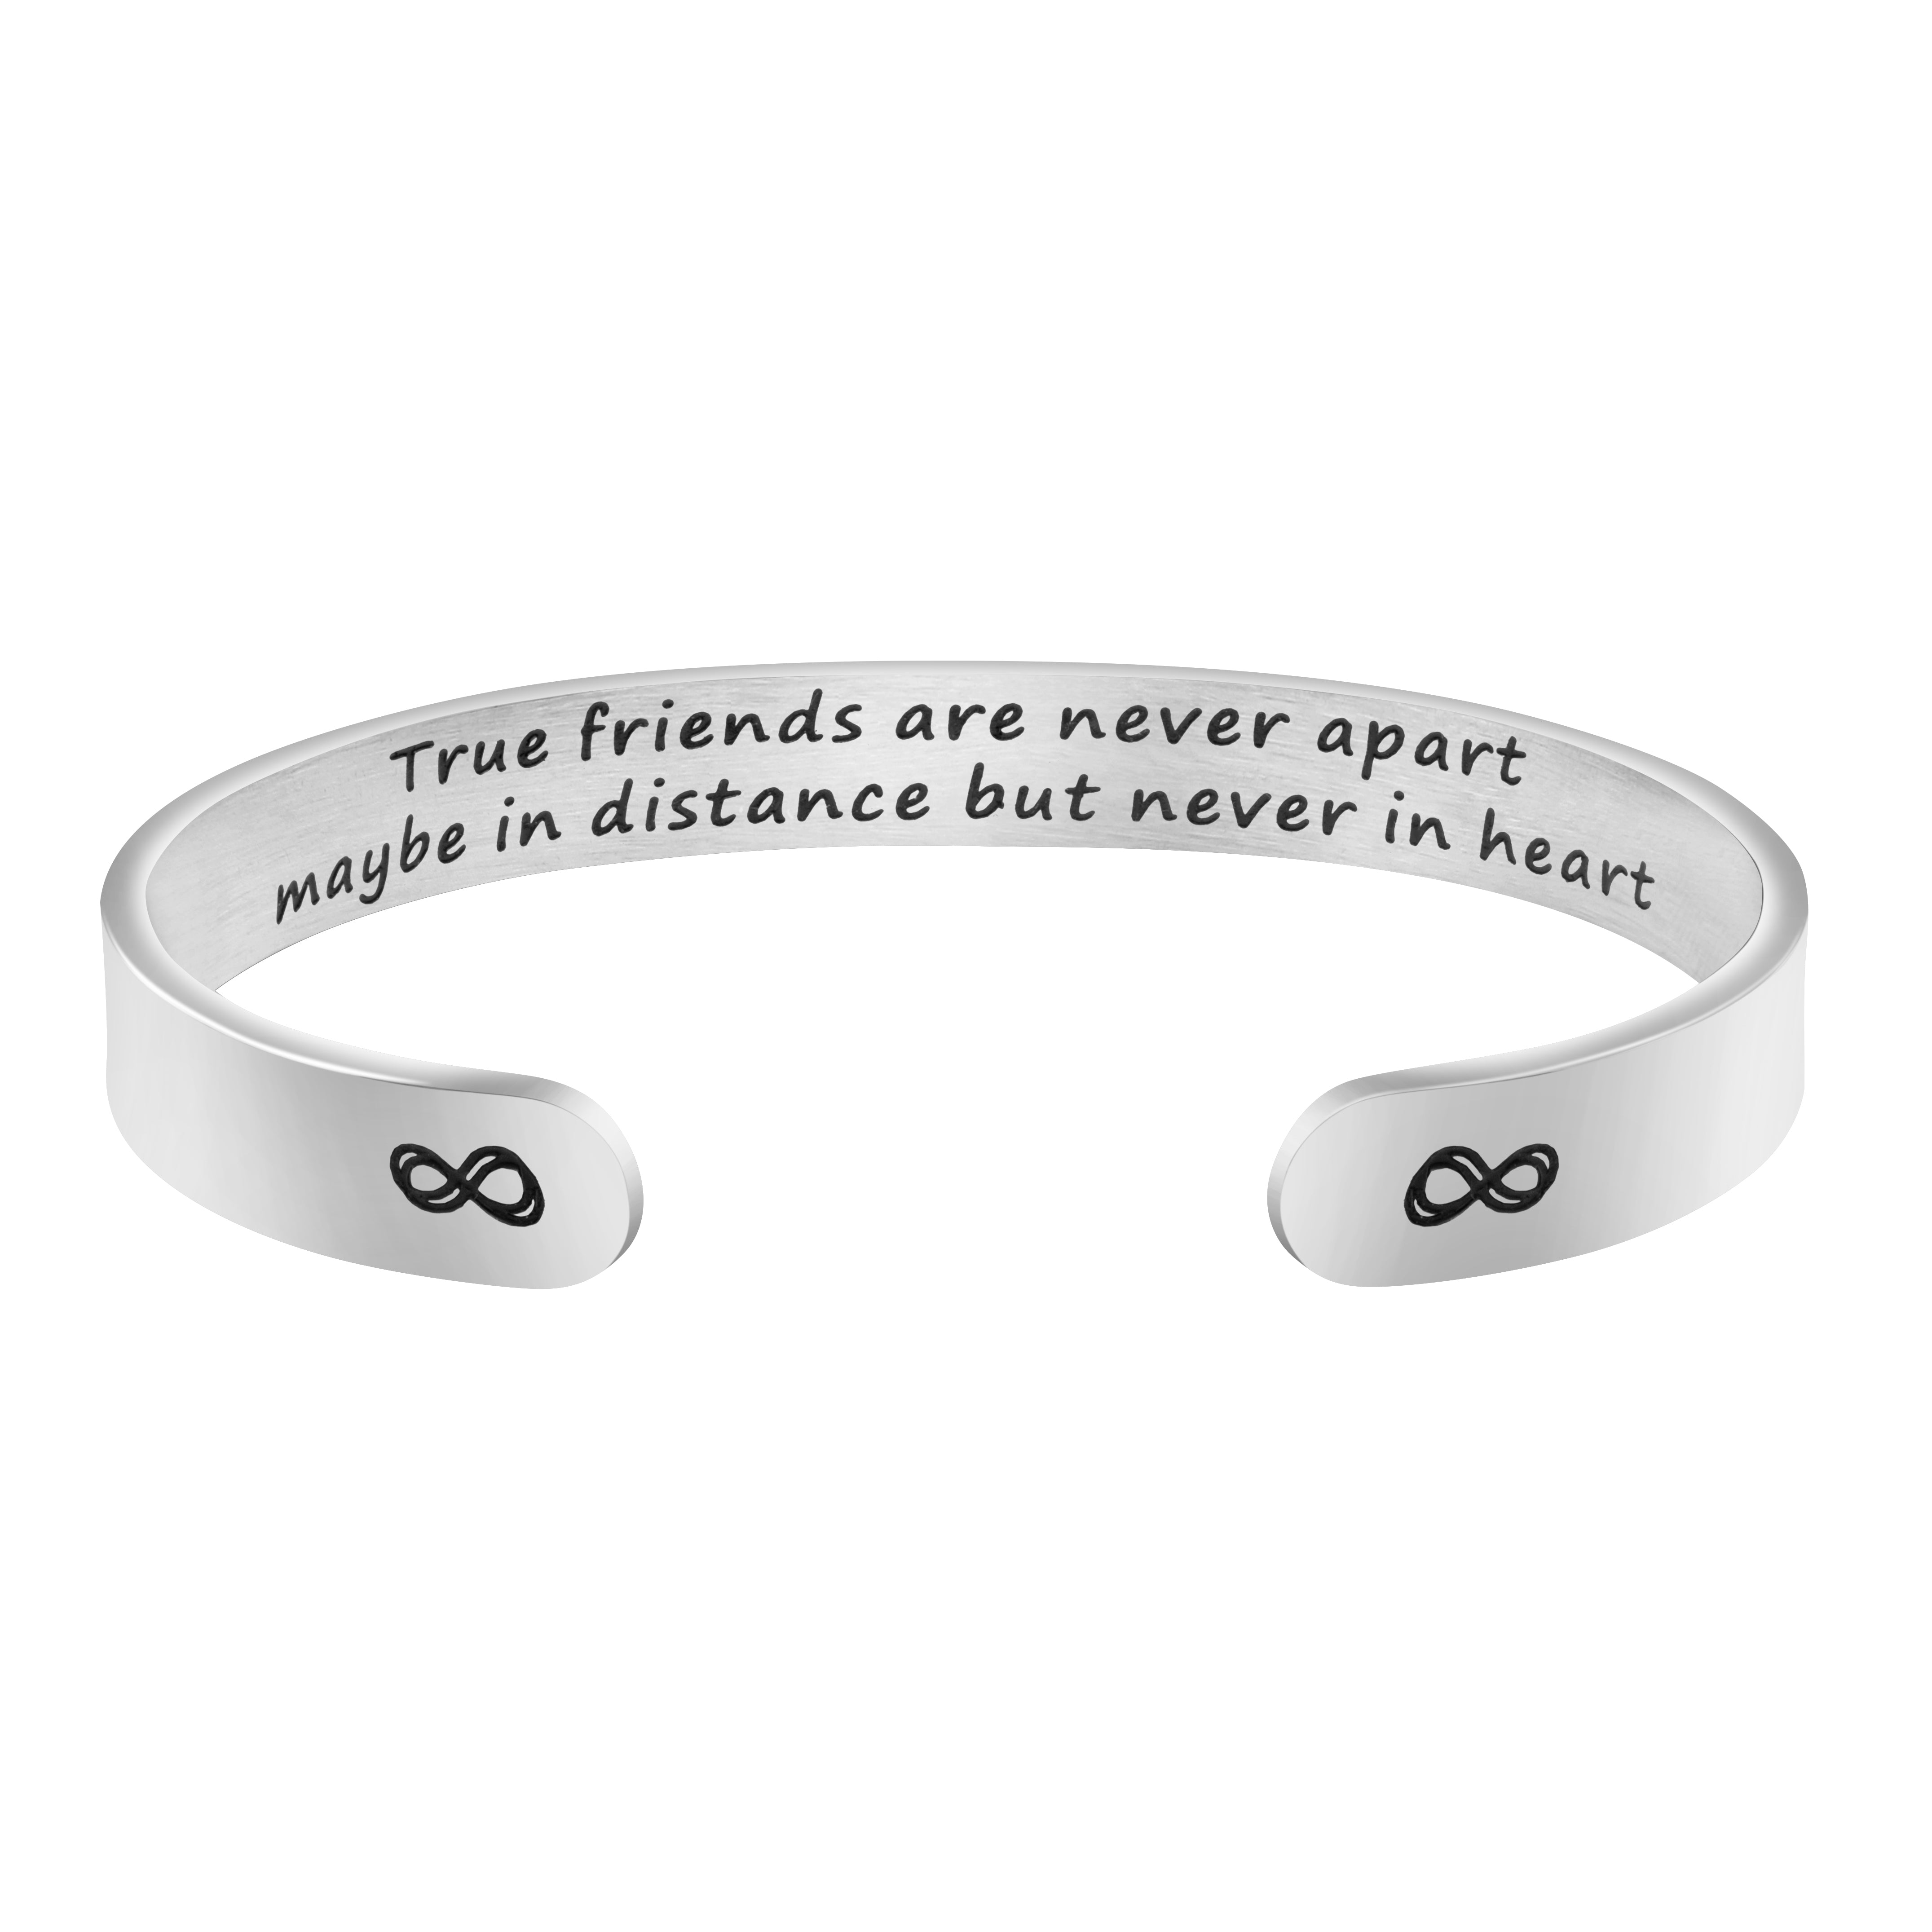 Long Distance Friendship Gift for Best Friend Jewelry  BFF Cuff Bracelet   True Friends are Never Apart Maybe in Distance But Never in Heart Bangle   Joycuff